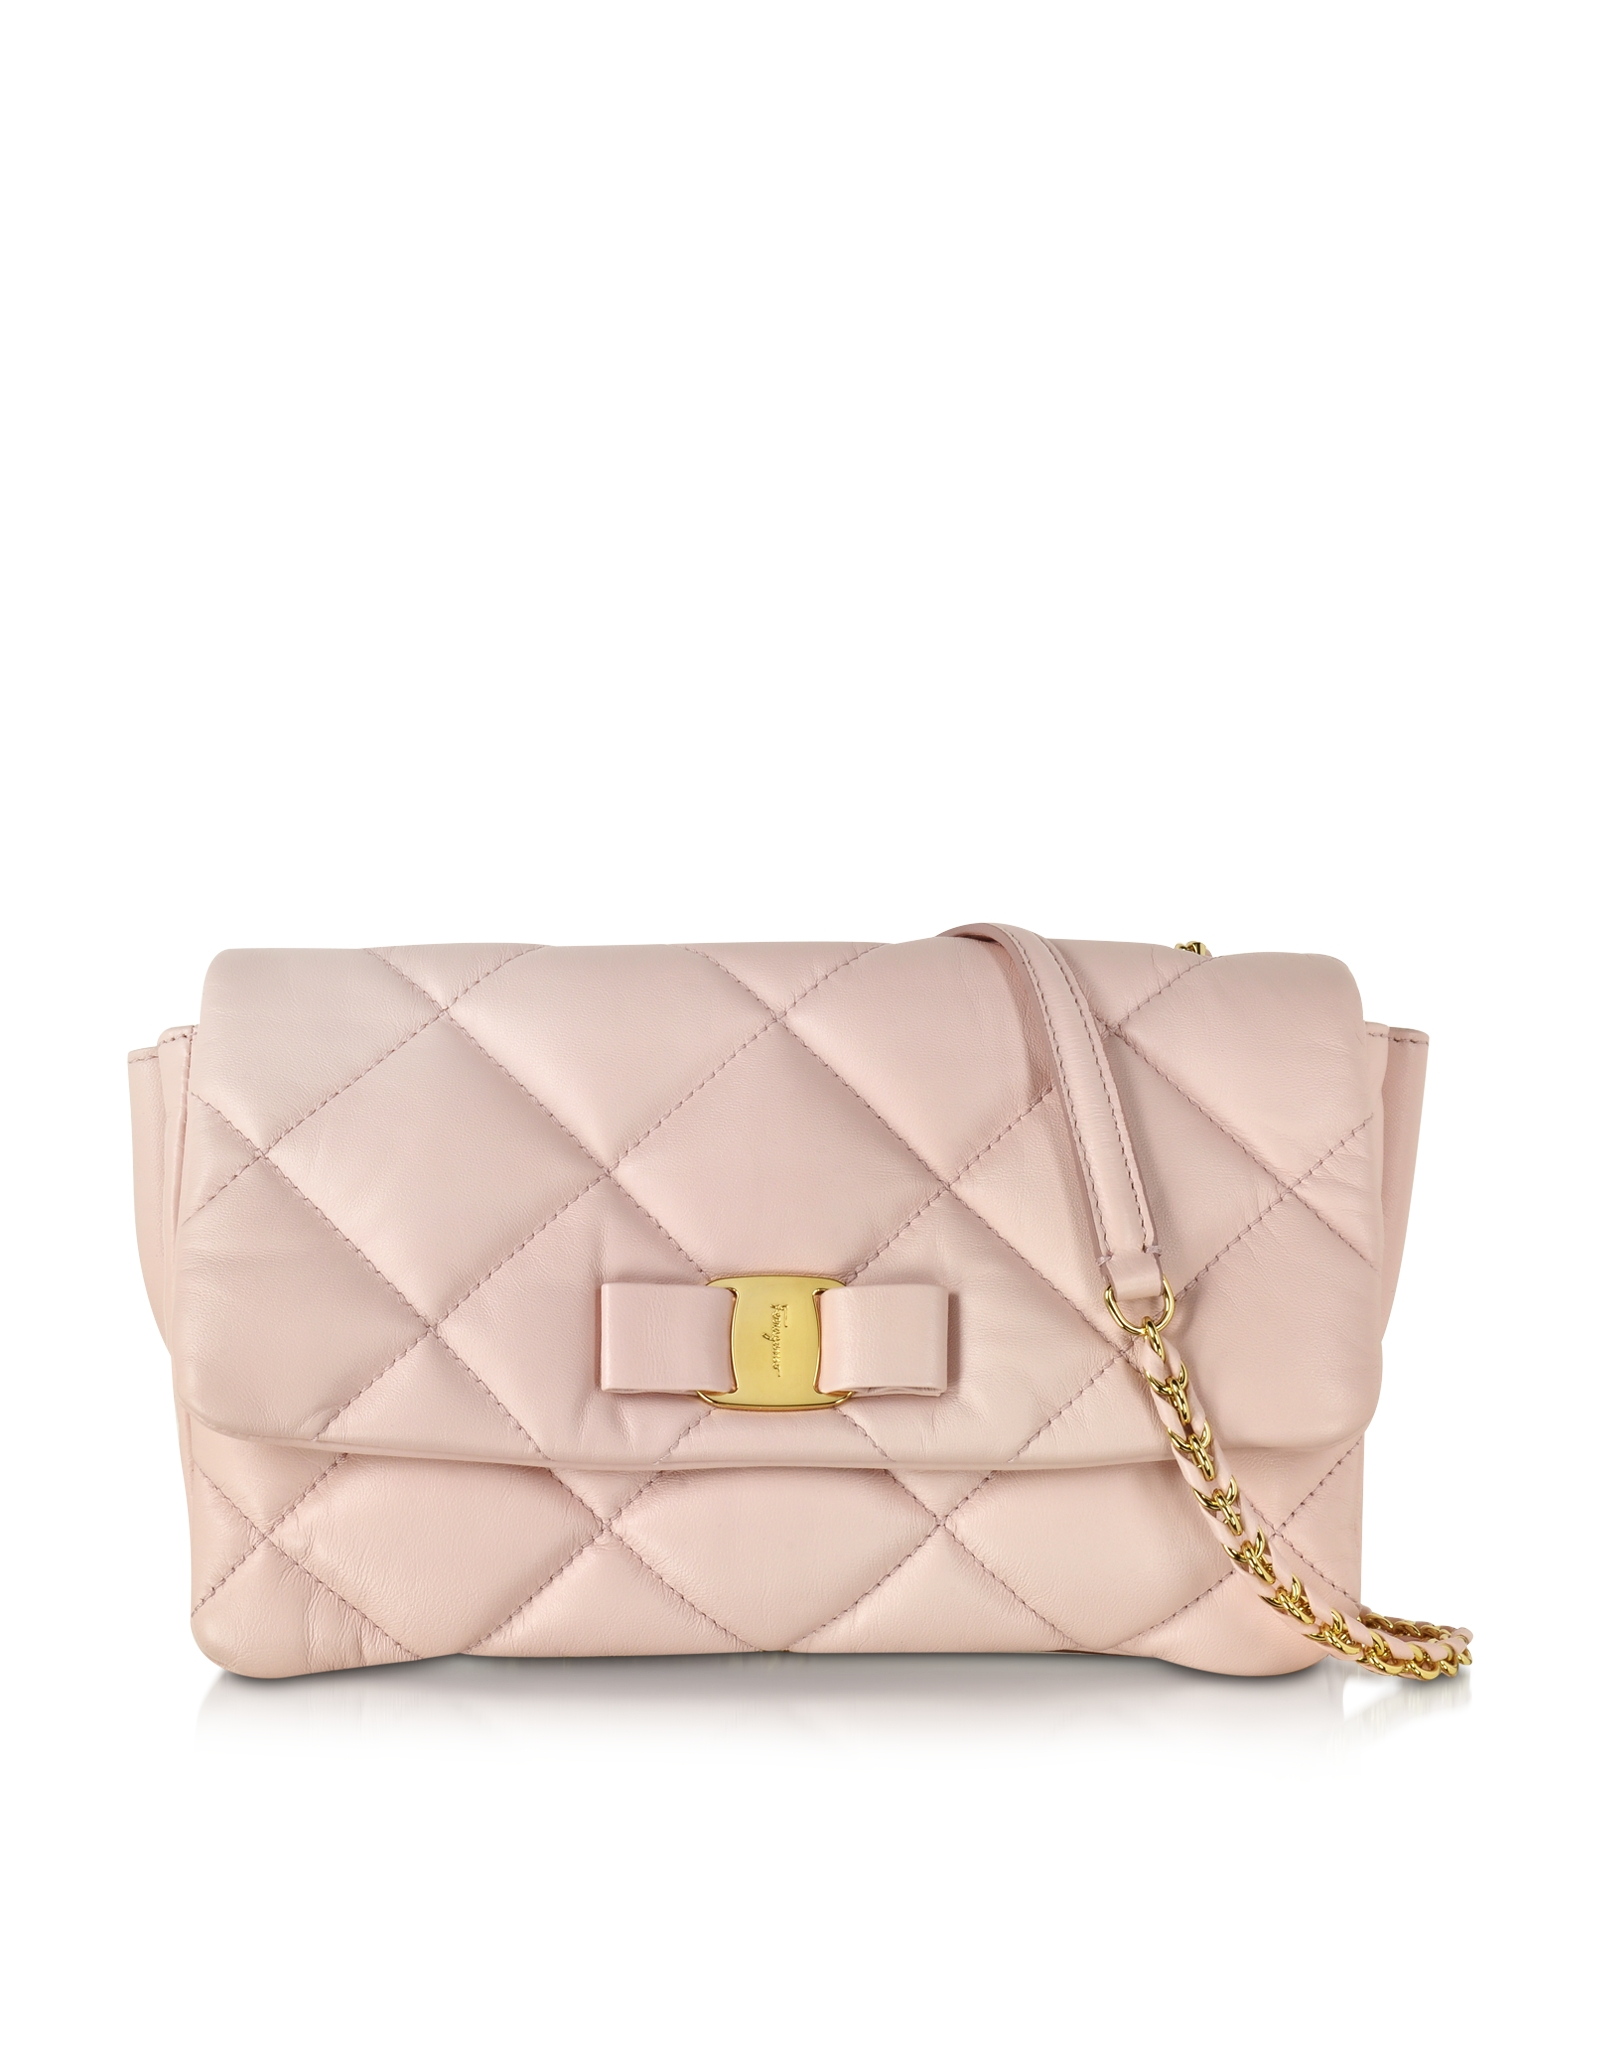 Ferragamo Gelly Quilted Nappa Leather Shoulder Bag in Pink (Macaron) | Lyst